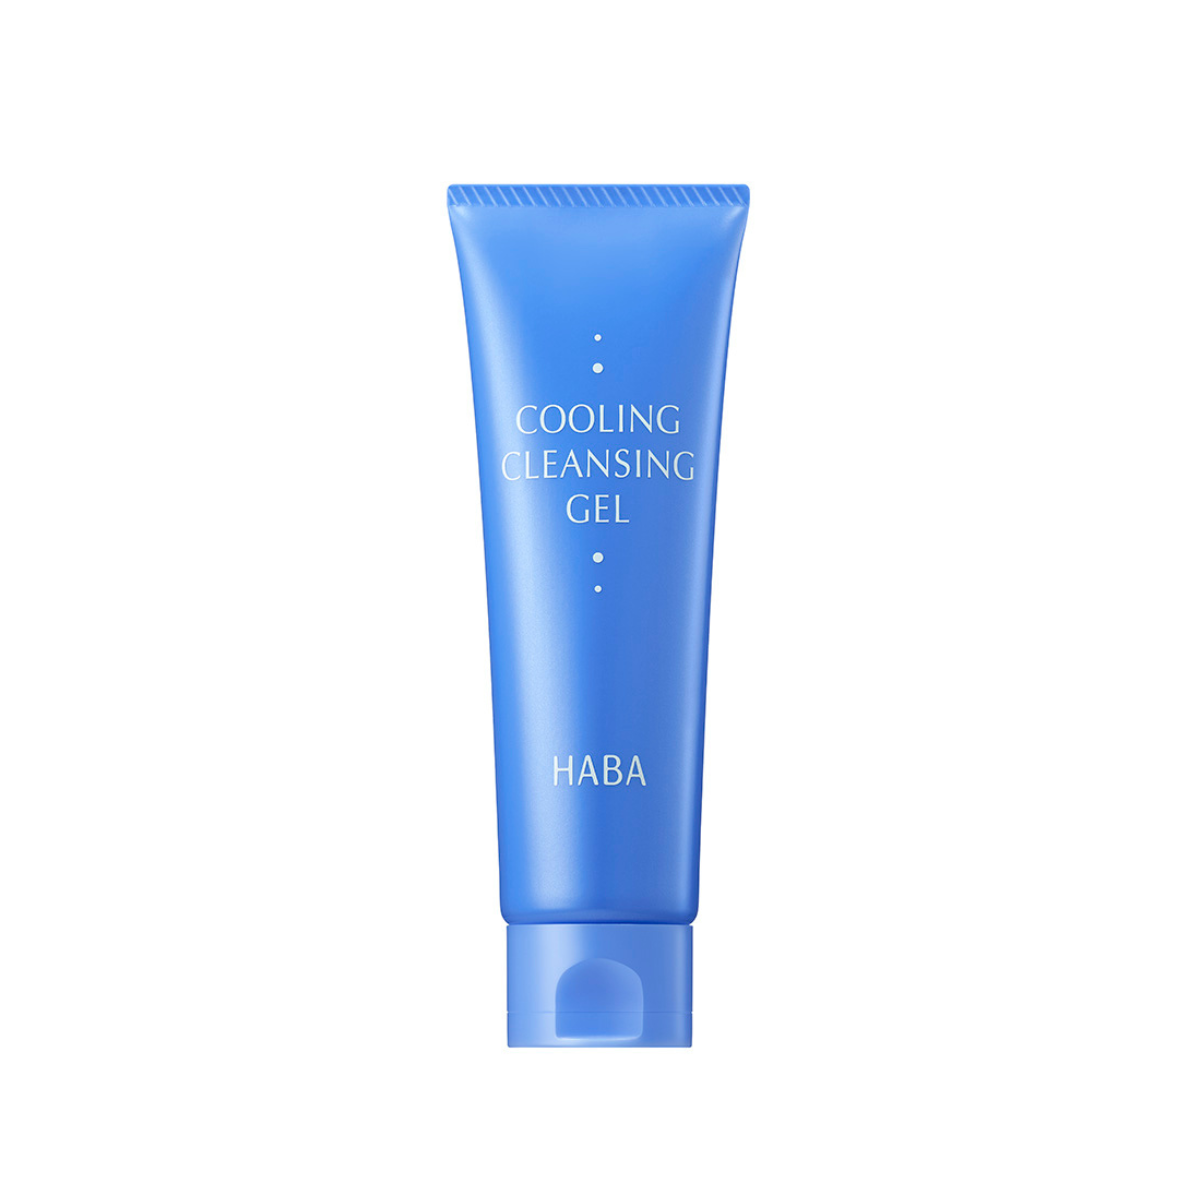 008053 COOLING CLEANSING GEL 50G